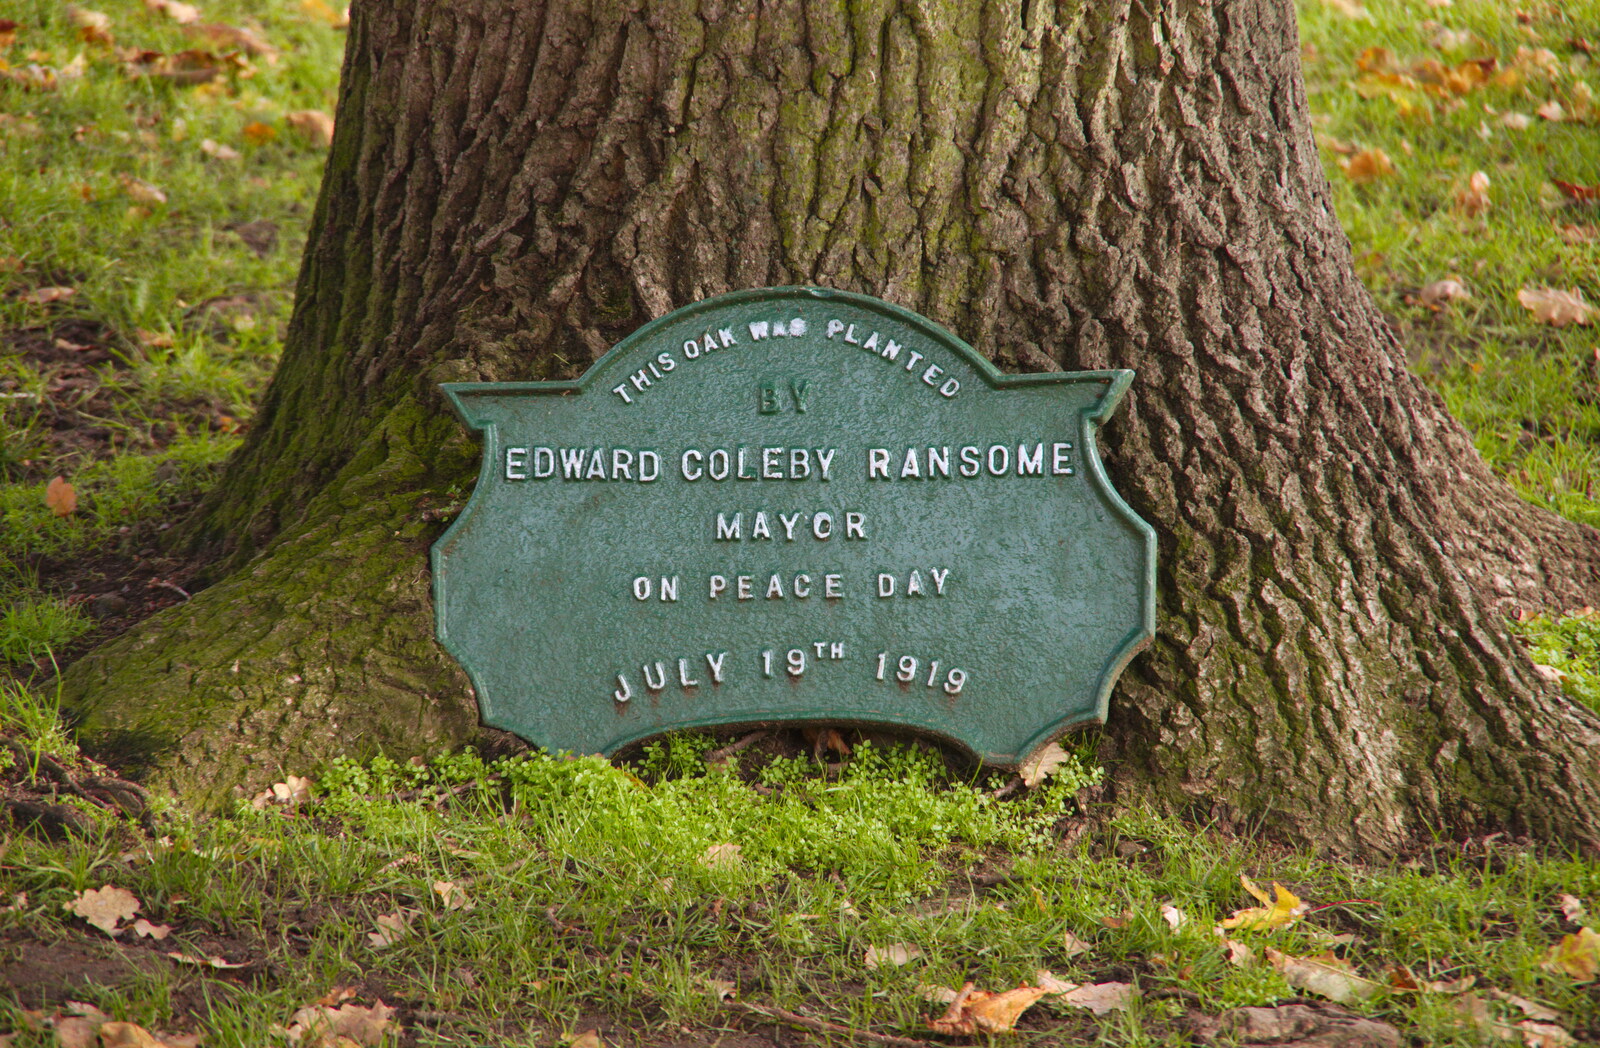 A 100-year old oak tree, and plaque for a mayor from Exam Day Dereliction, Ipswich, Suffolk - 13th November 2019